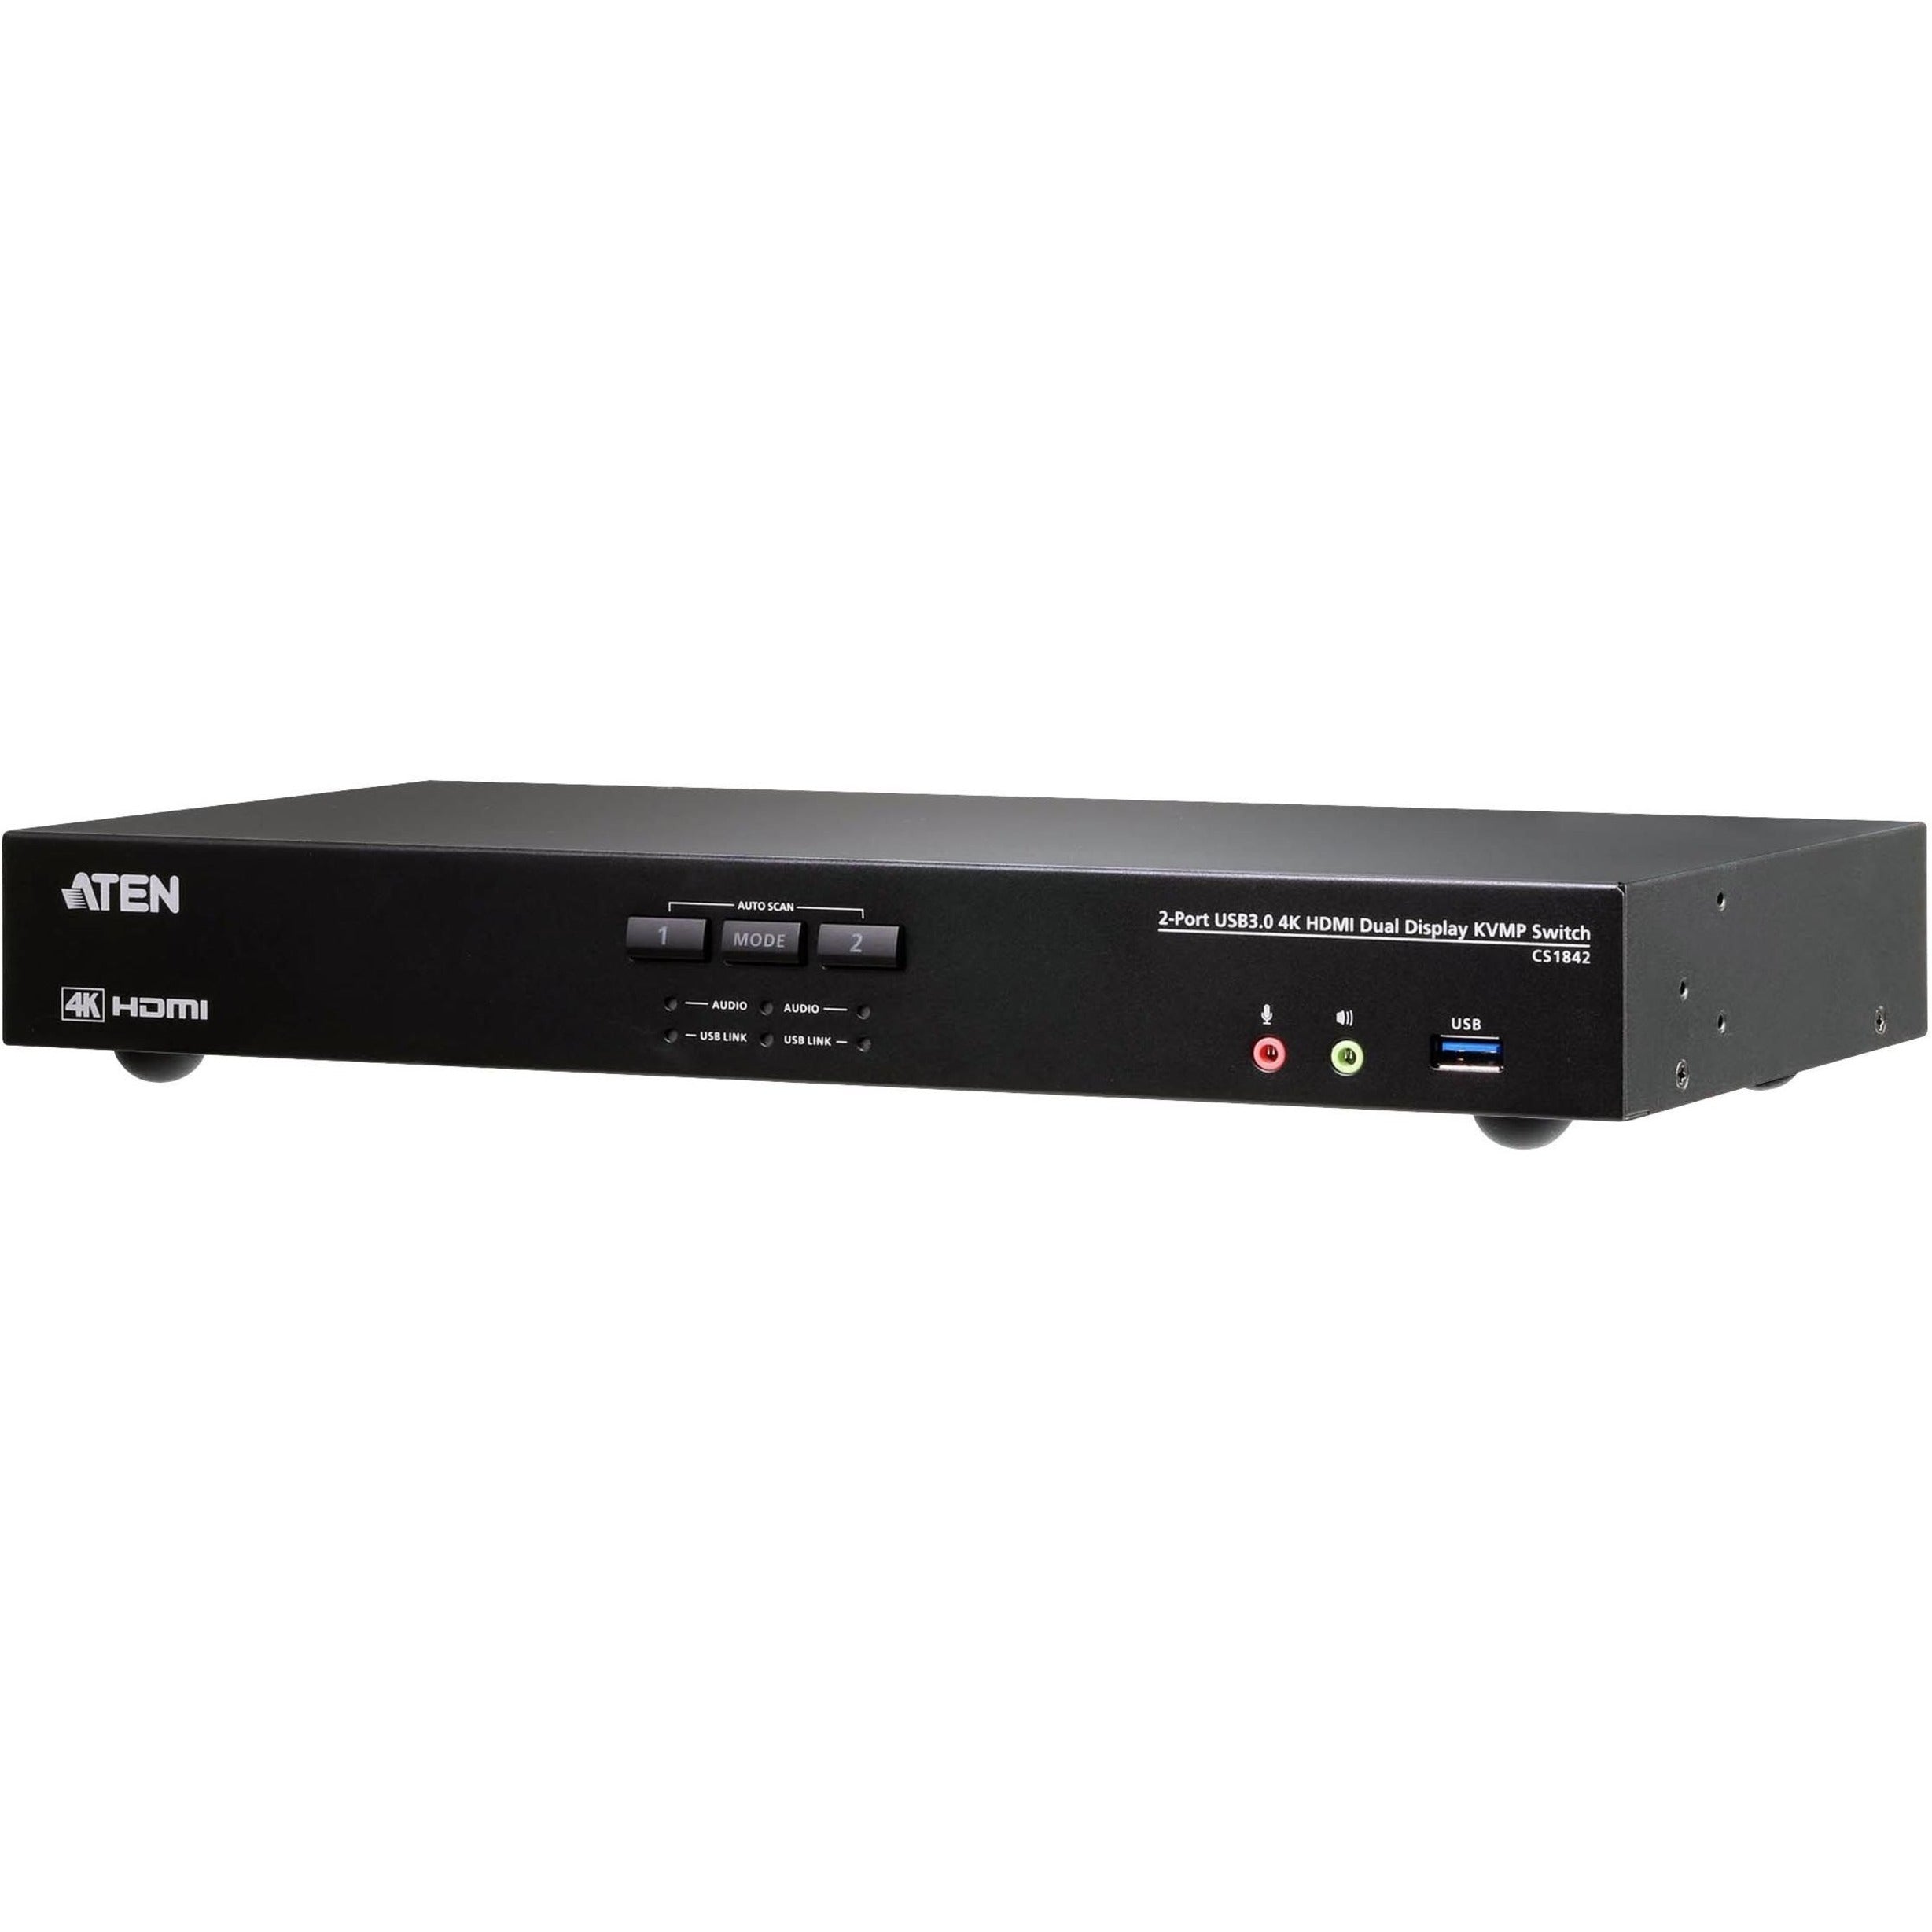 ATEN CS1842 2-Port USB 3.0 4K HDMI Dual Display KVMP Switch, Easy Switching and Control for Multiple Computers